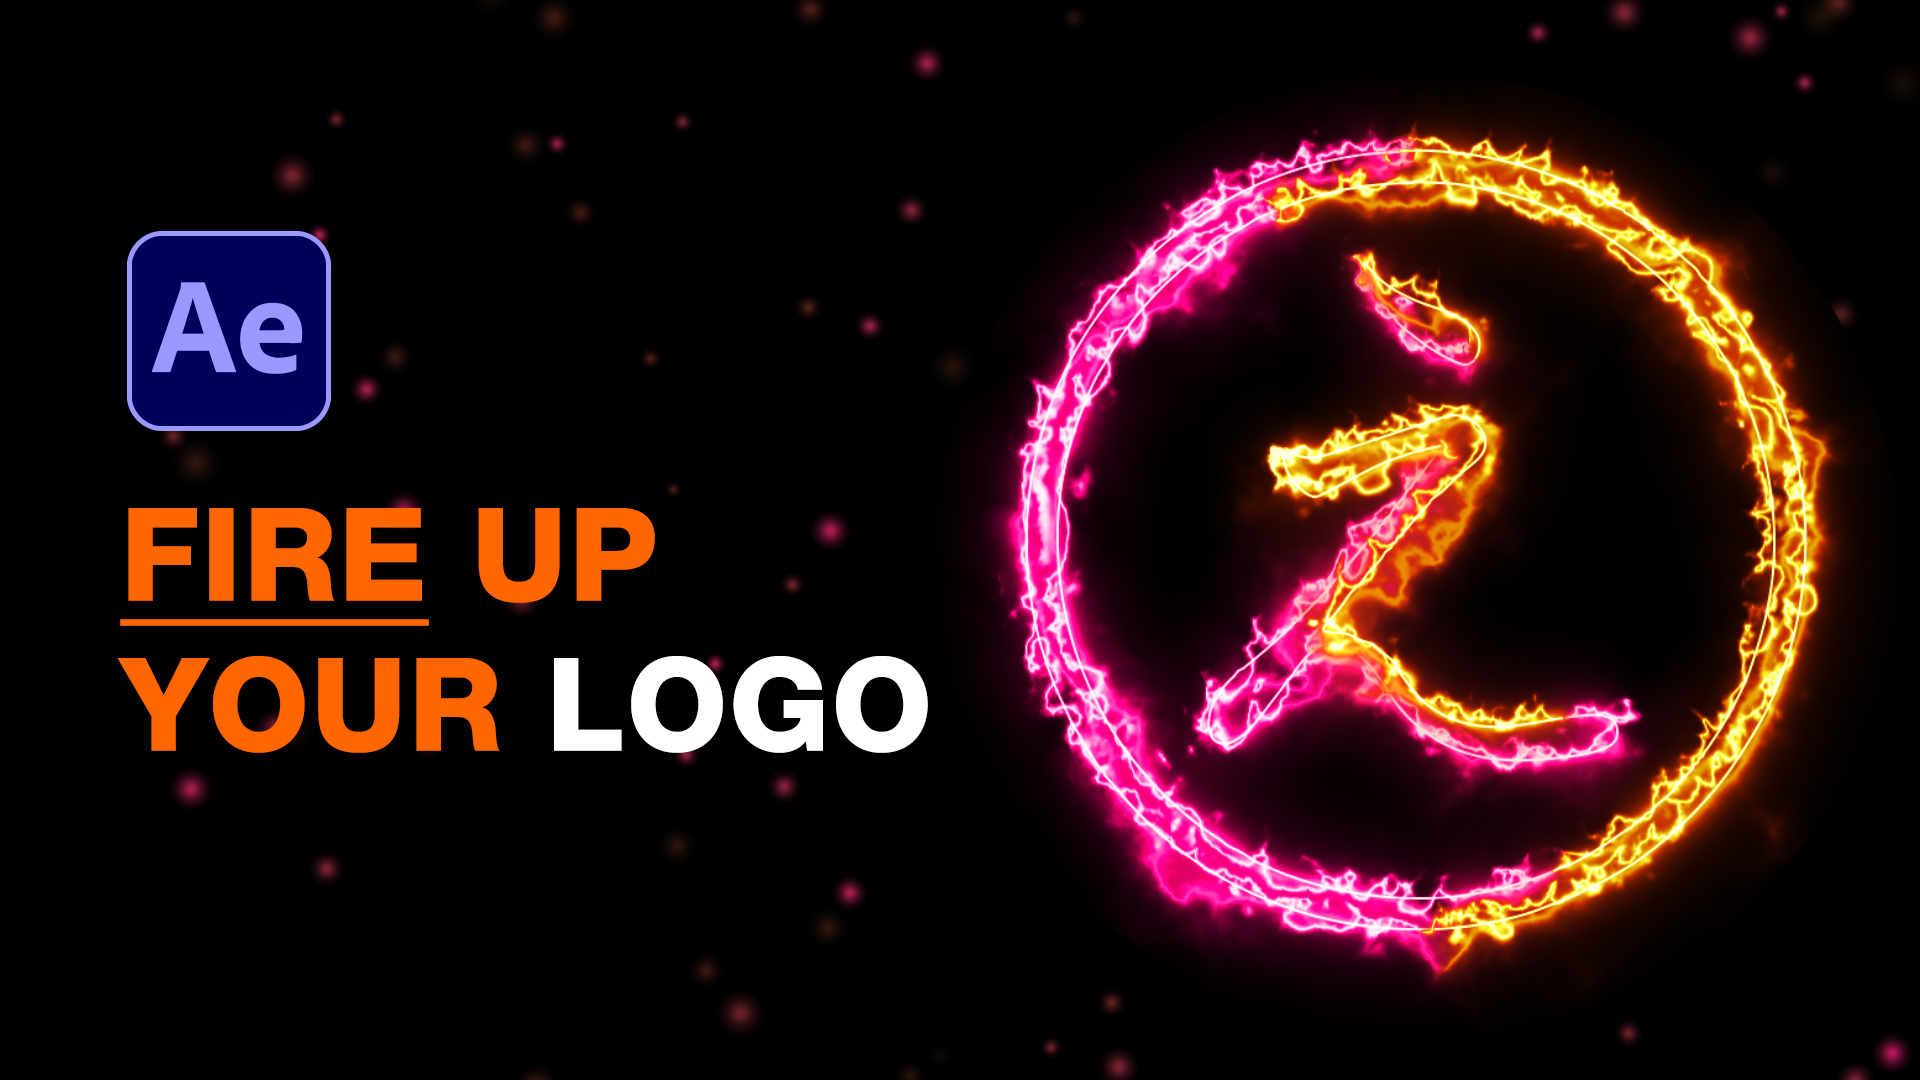 Saber plugin tutorial, After Effects fire up your Logo